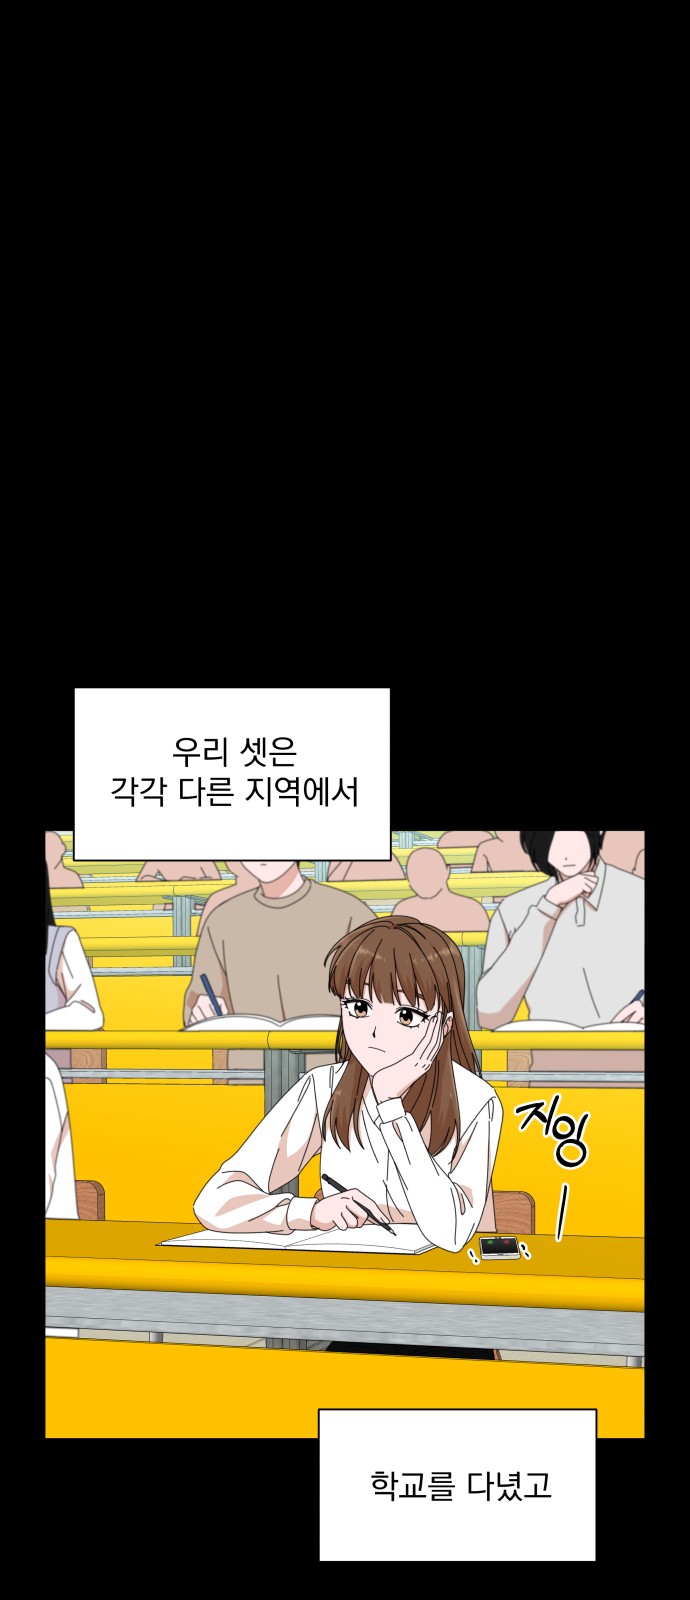 The Man With Pretty Lips - Chapter 29 - Page 2